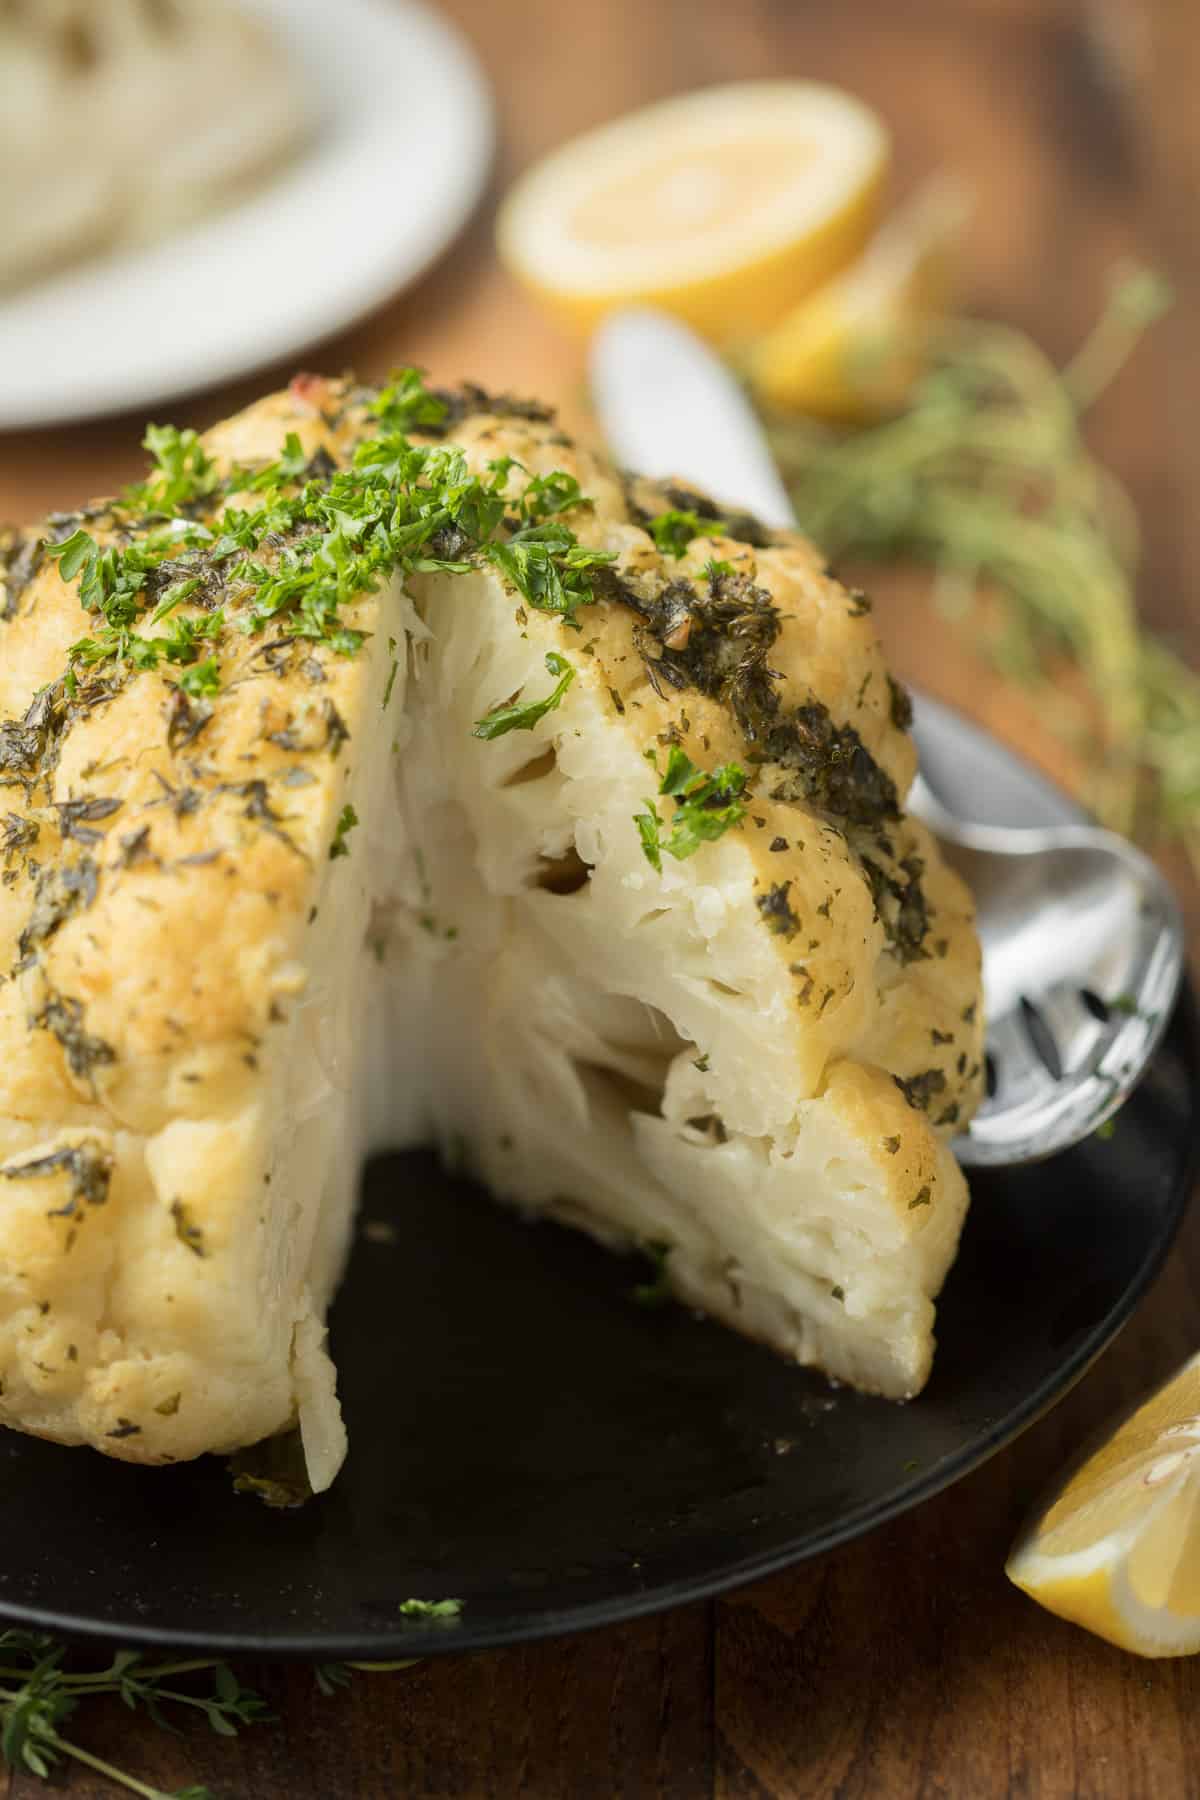 Whole Roasted Cauliflower with a Wedge Cut out.